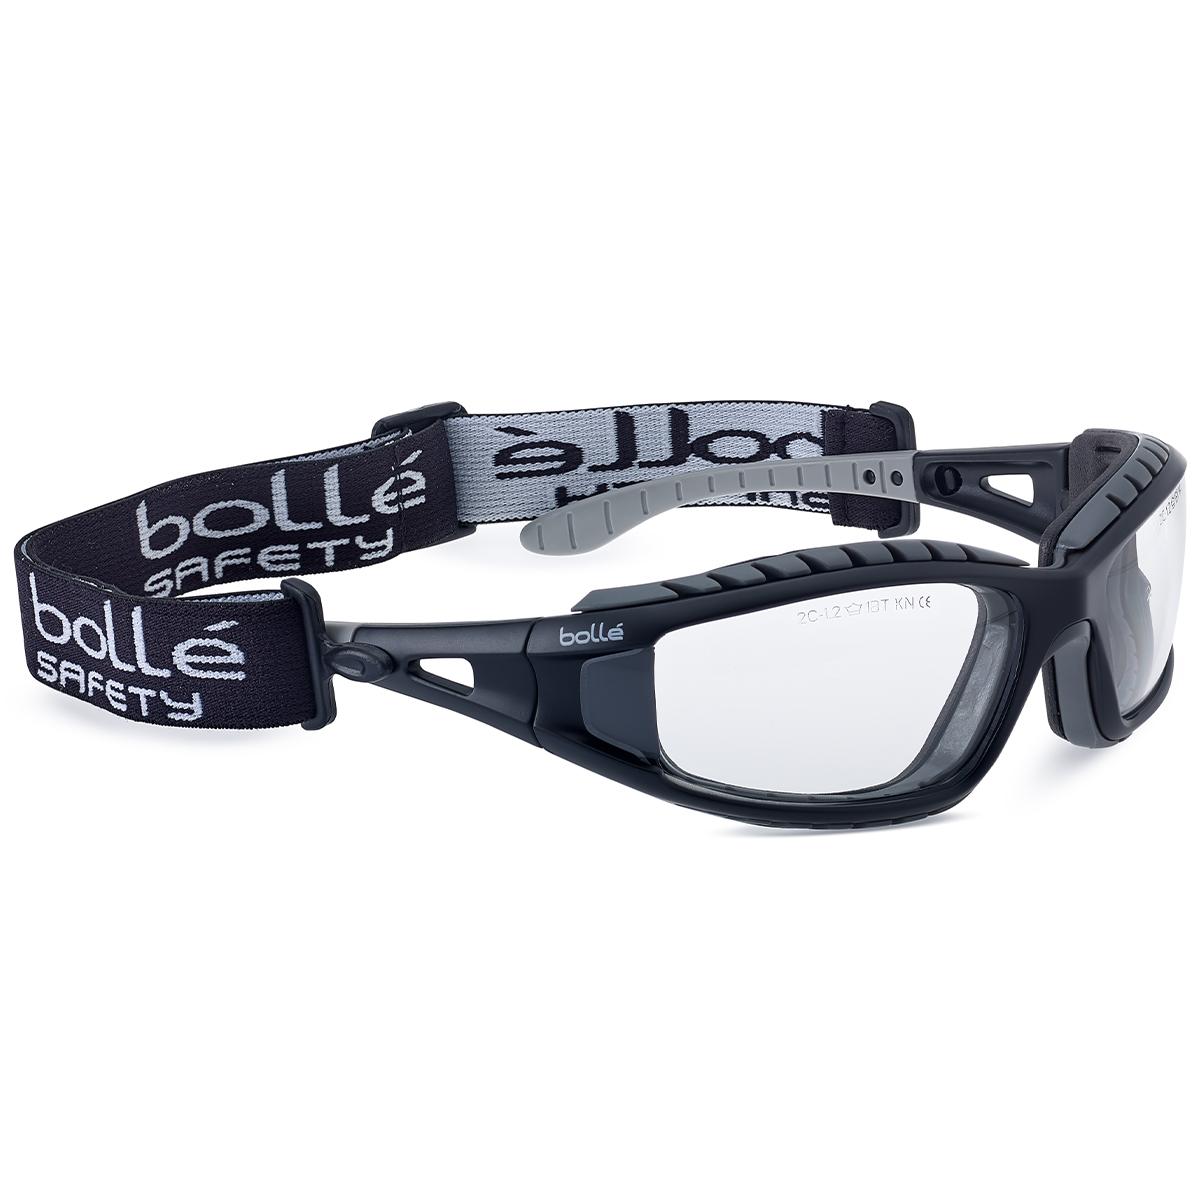 Bolle industrial work spectacles